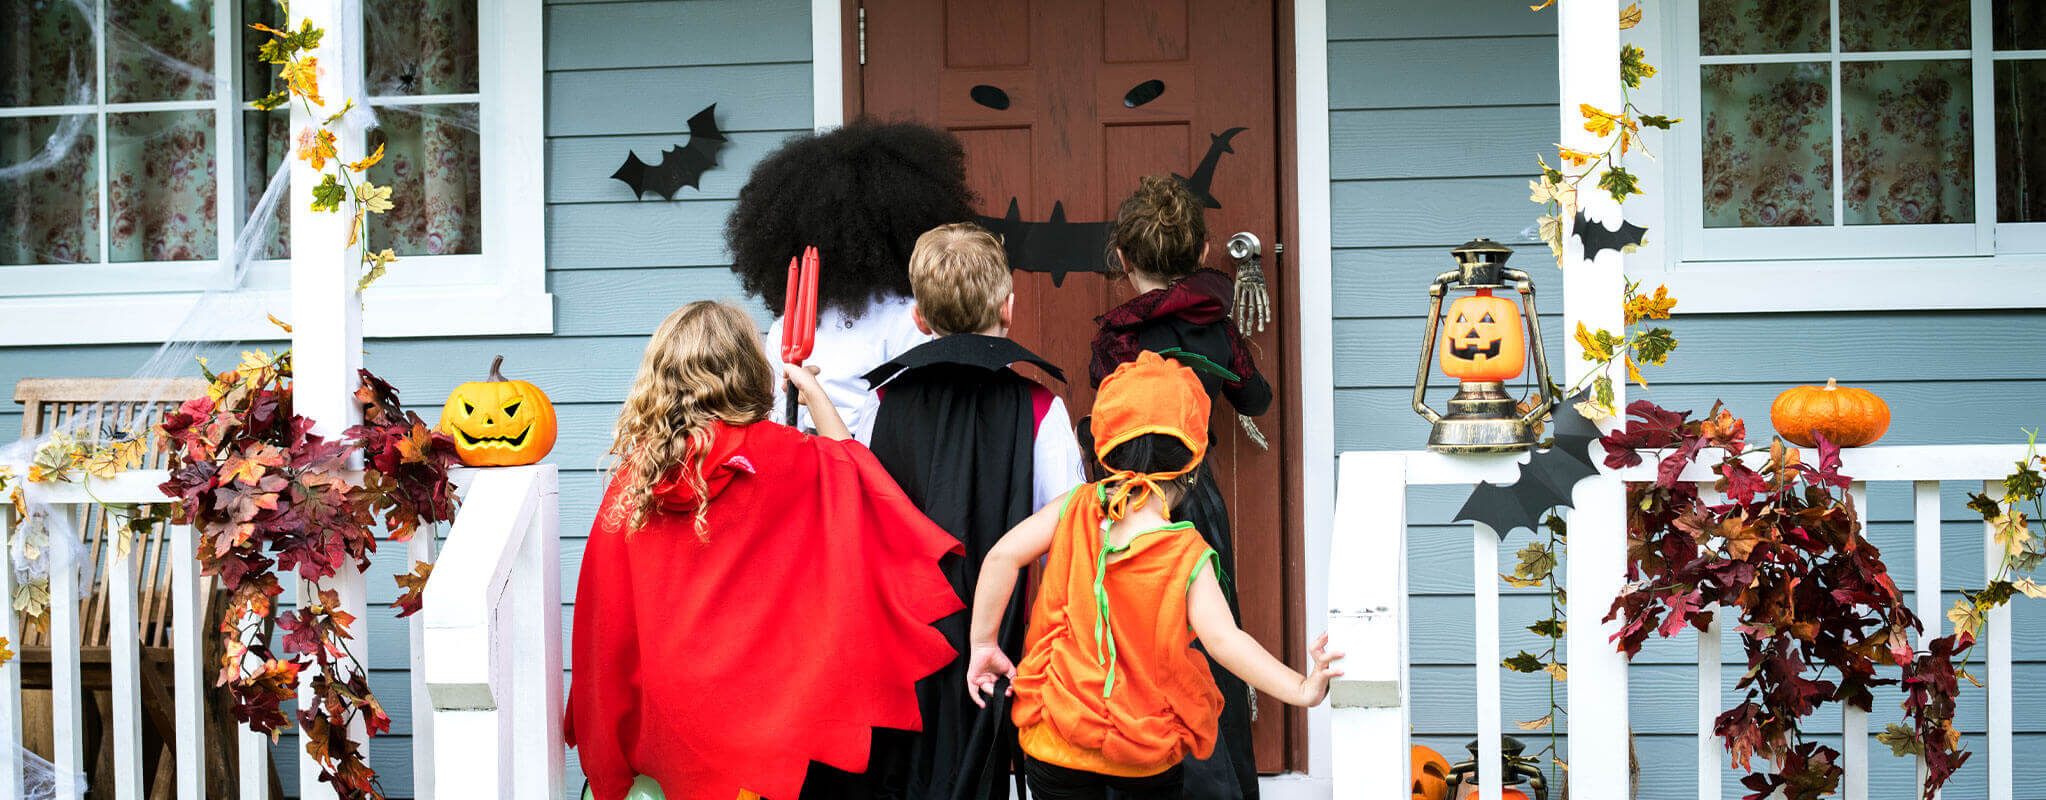 Halloween Safety Tips: Keep Your Rental Property Trick-Free - TurboTenant